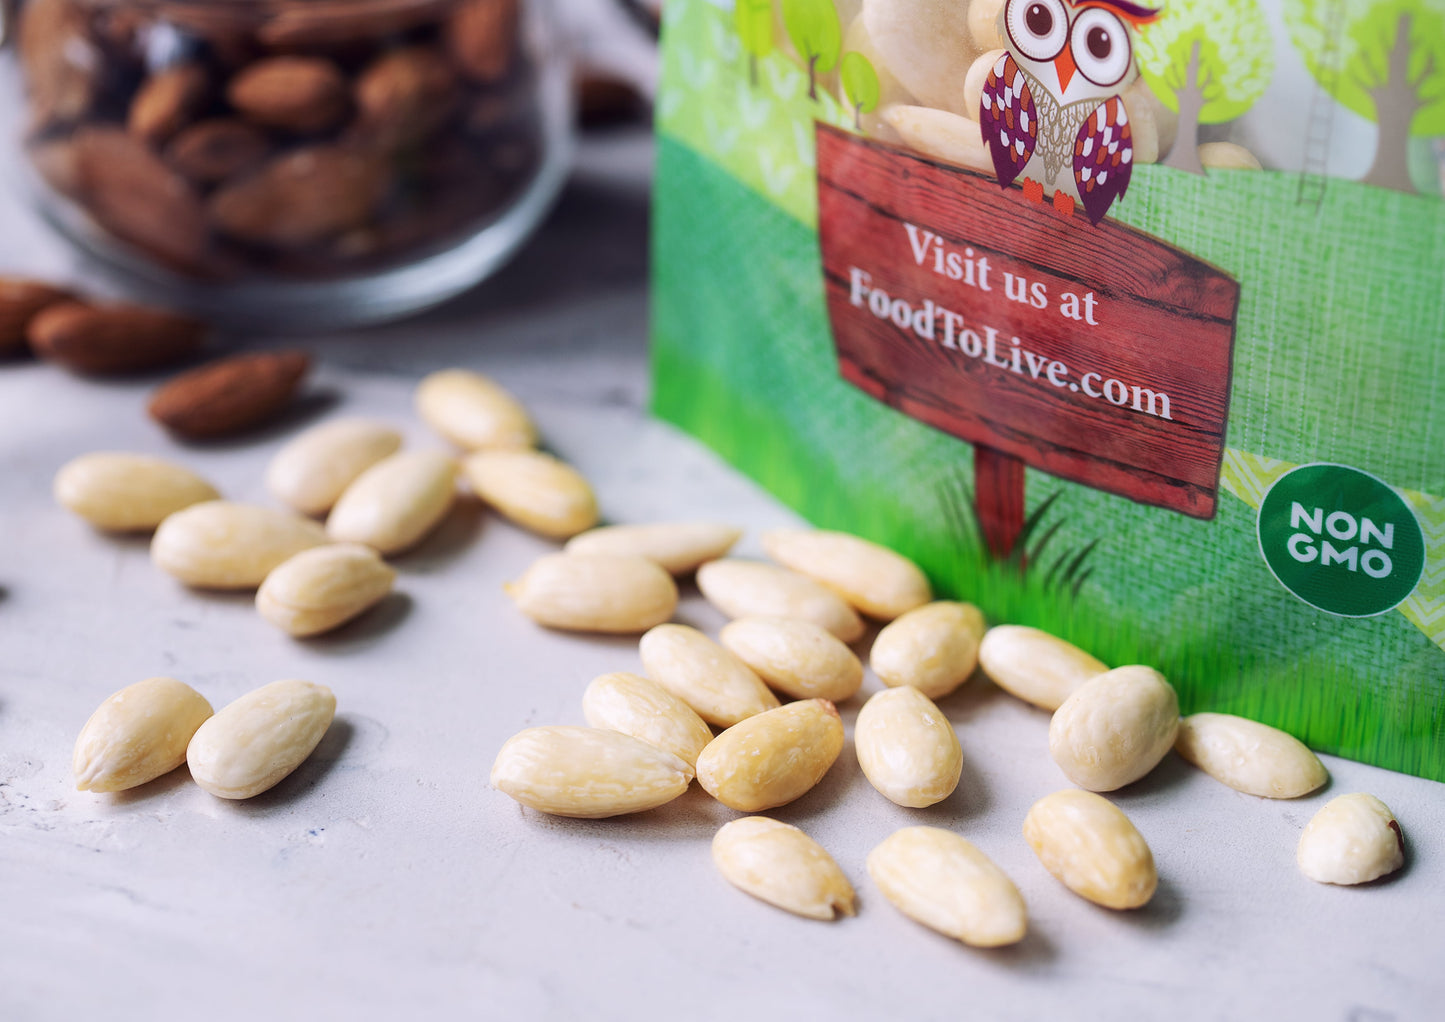 Organic Blanched Whole Almonds - Non-GMO, Raw, Unpasteurized, Unsalted, Keto, Paleo, Kosher, Bulk - by Food to Live